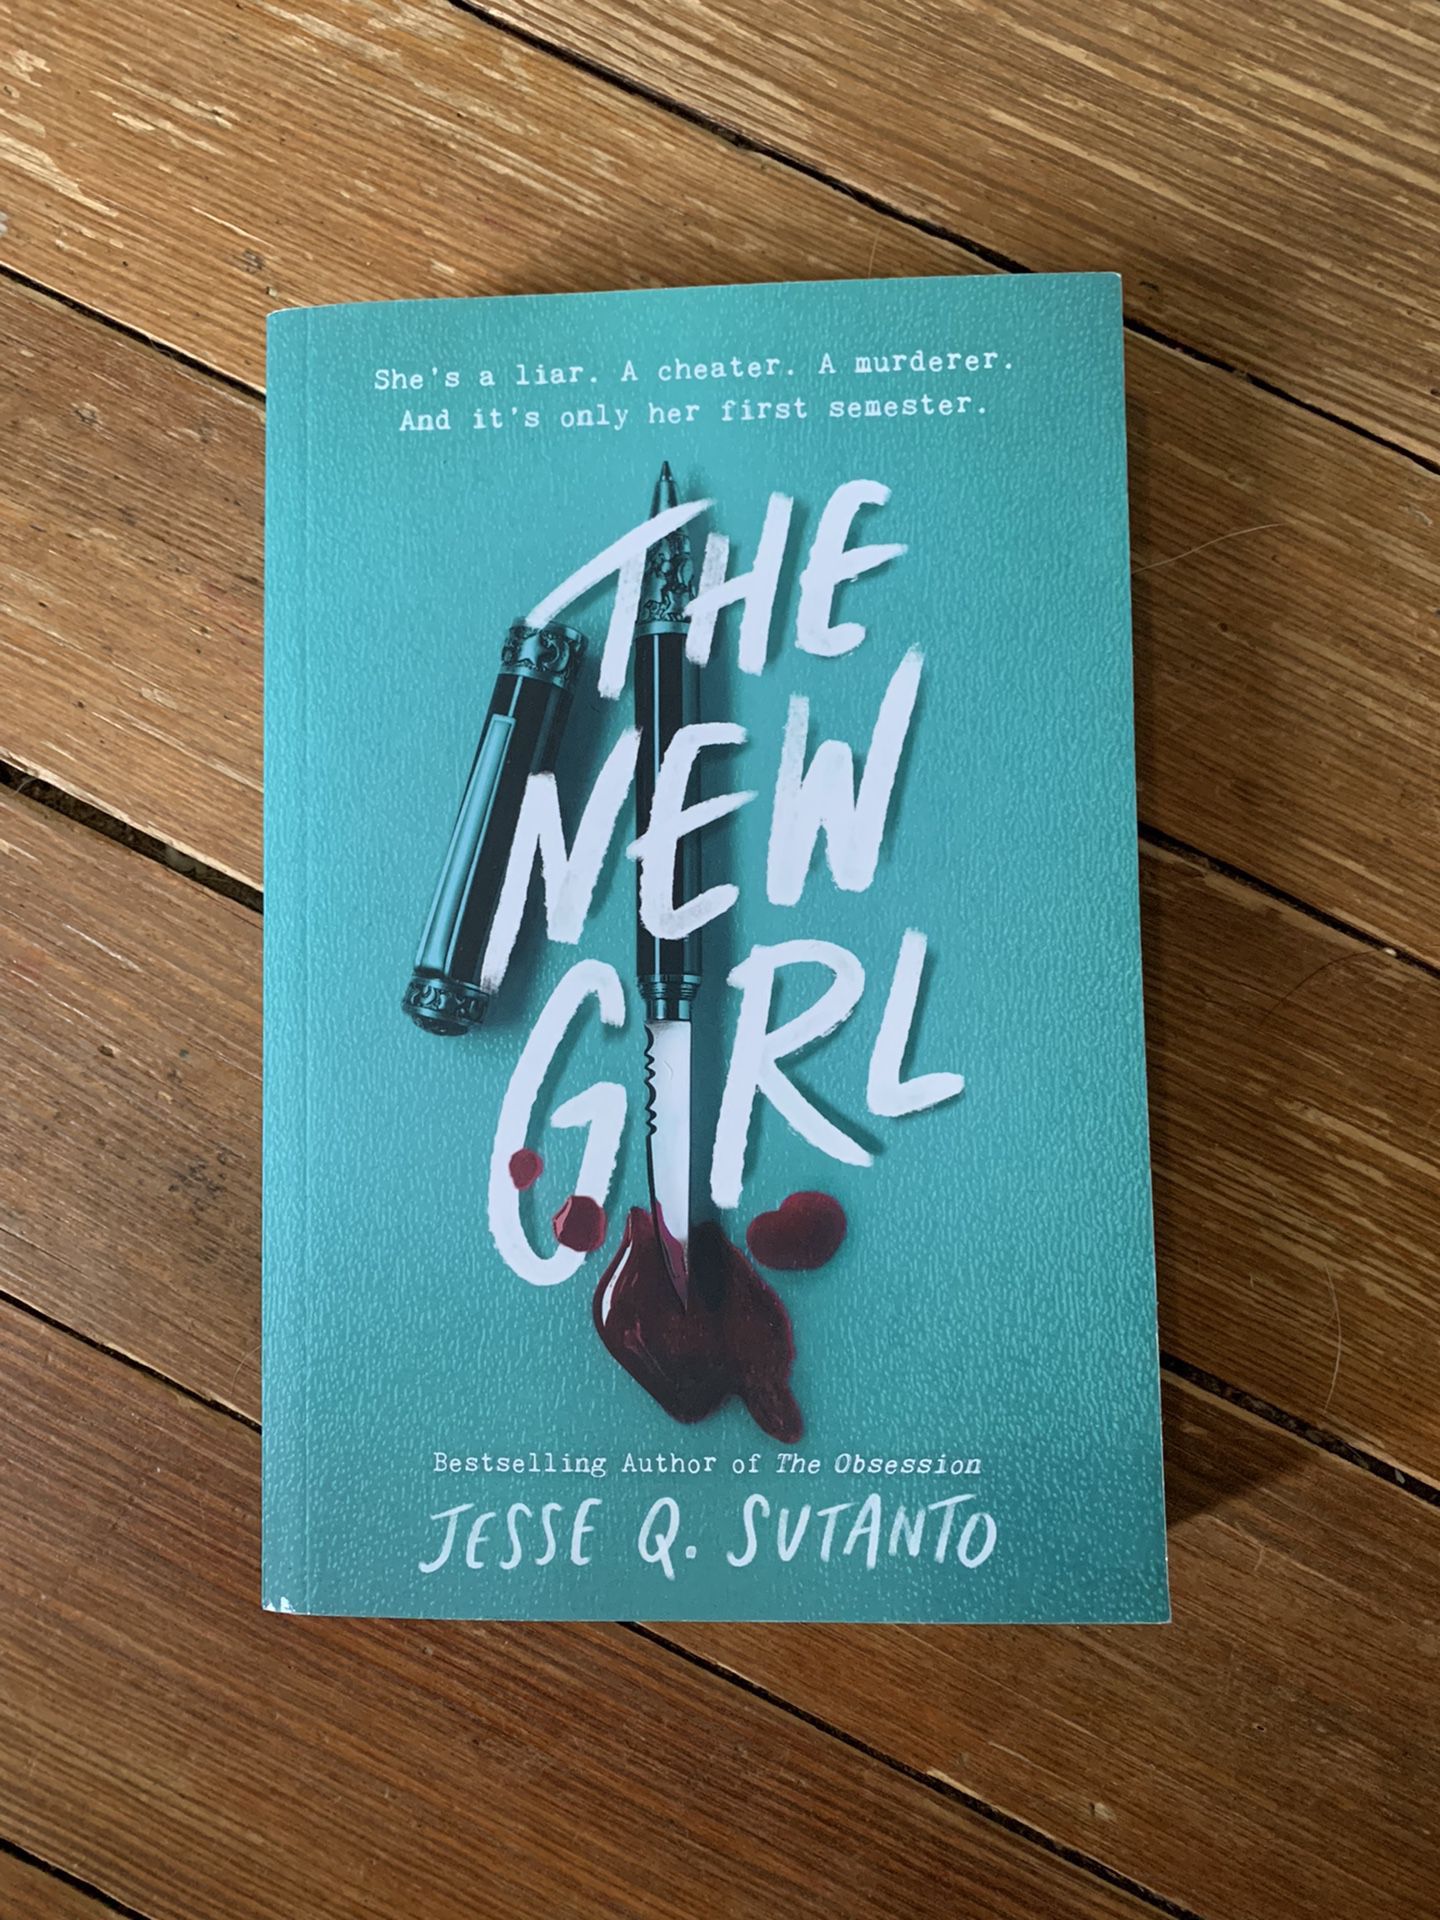 The New Girl - Book